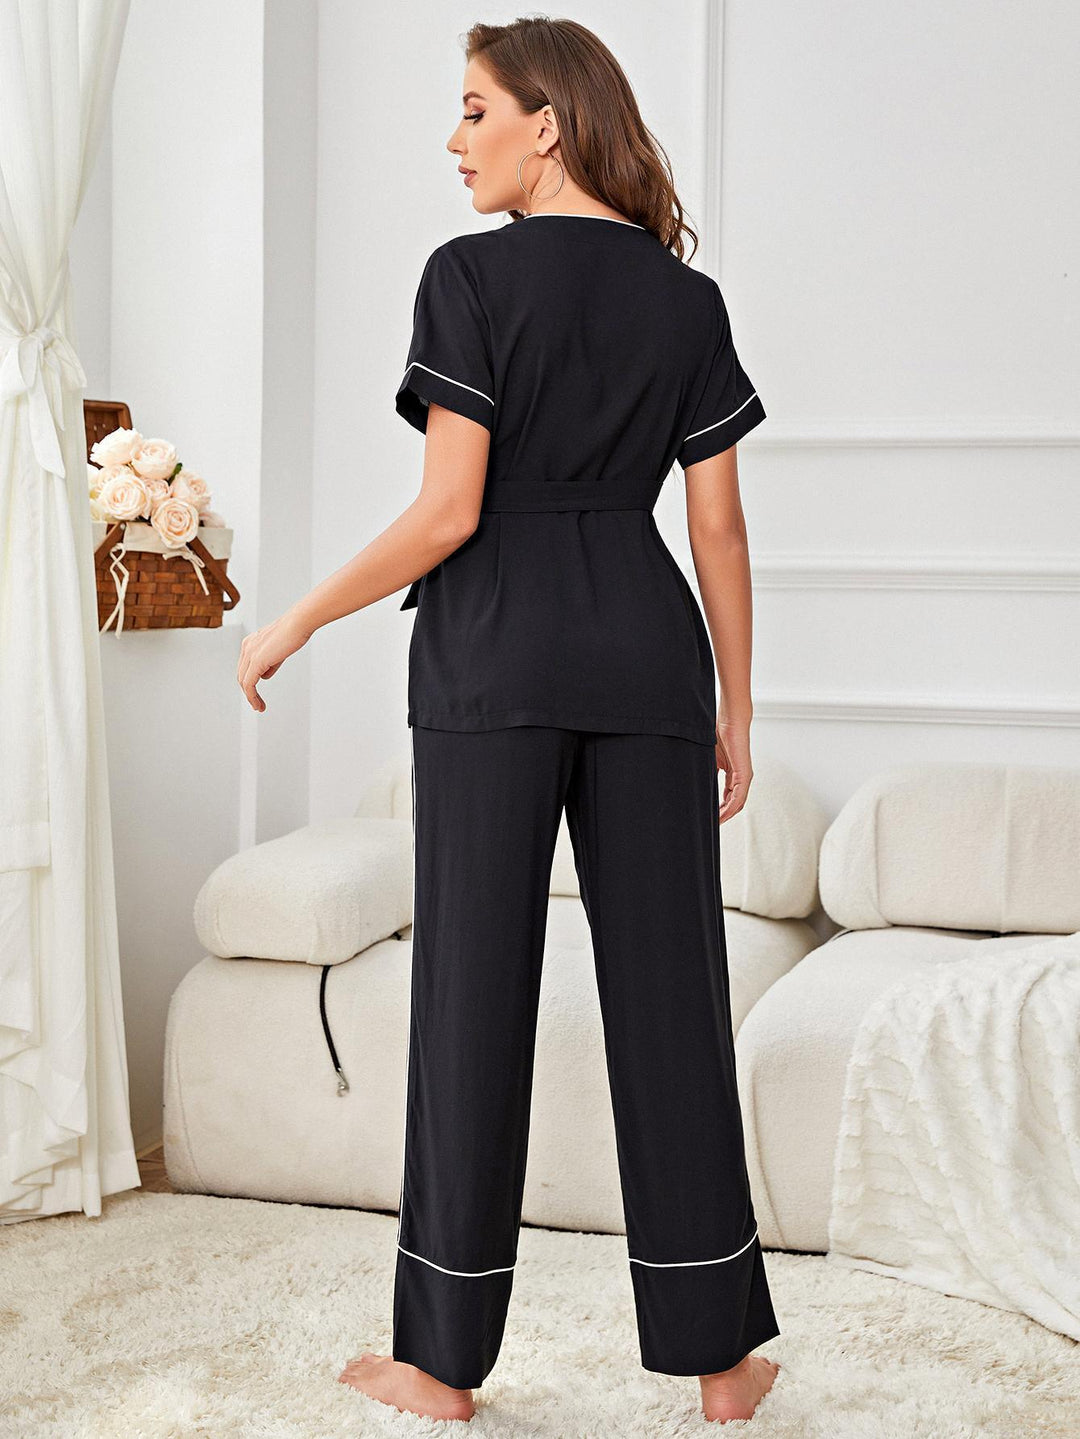 Contrast Piping Belted Top and Pants Pajama Set - Stuffed Cart